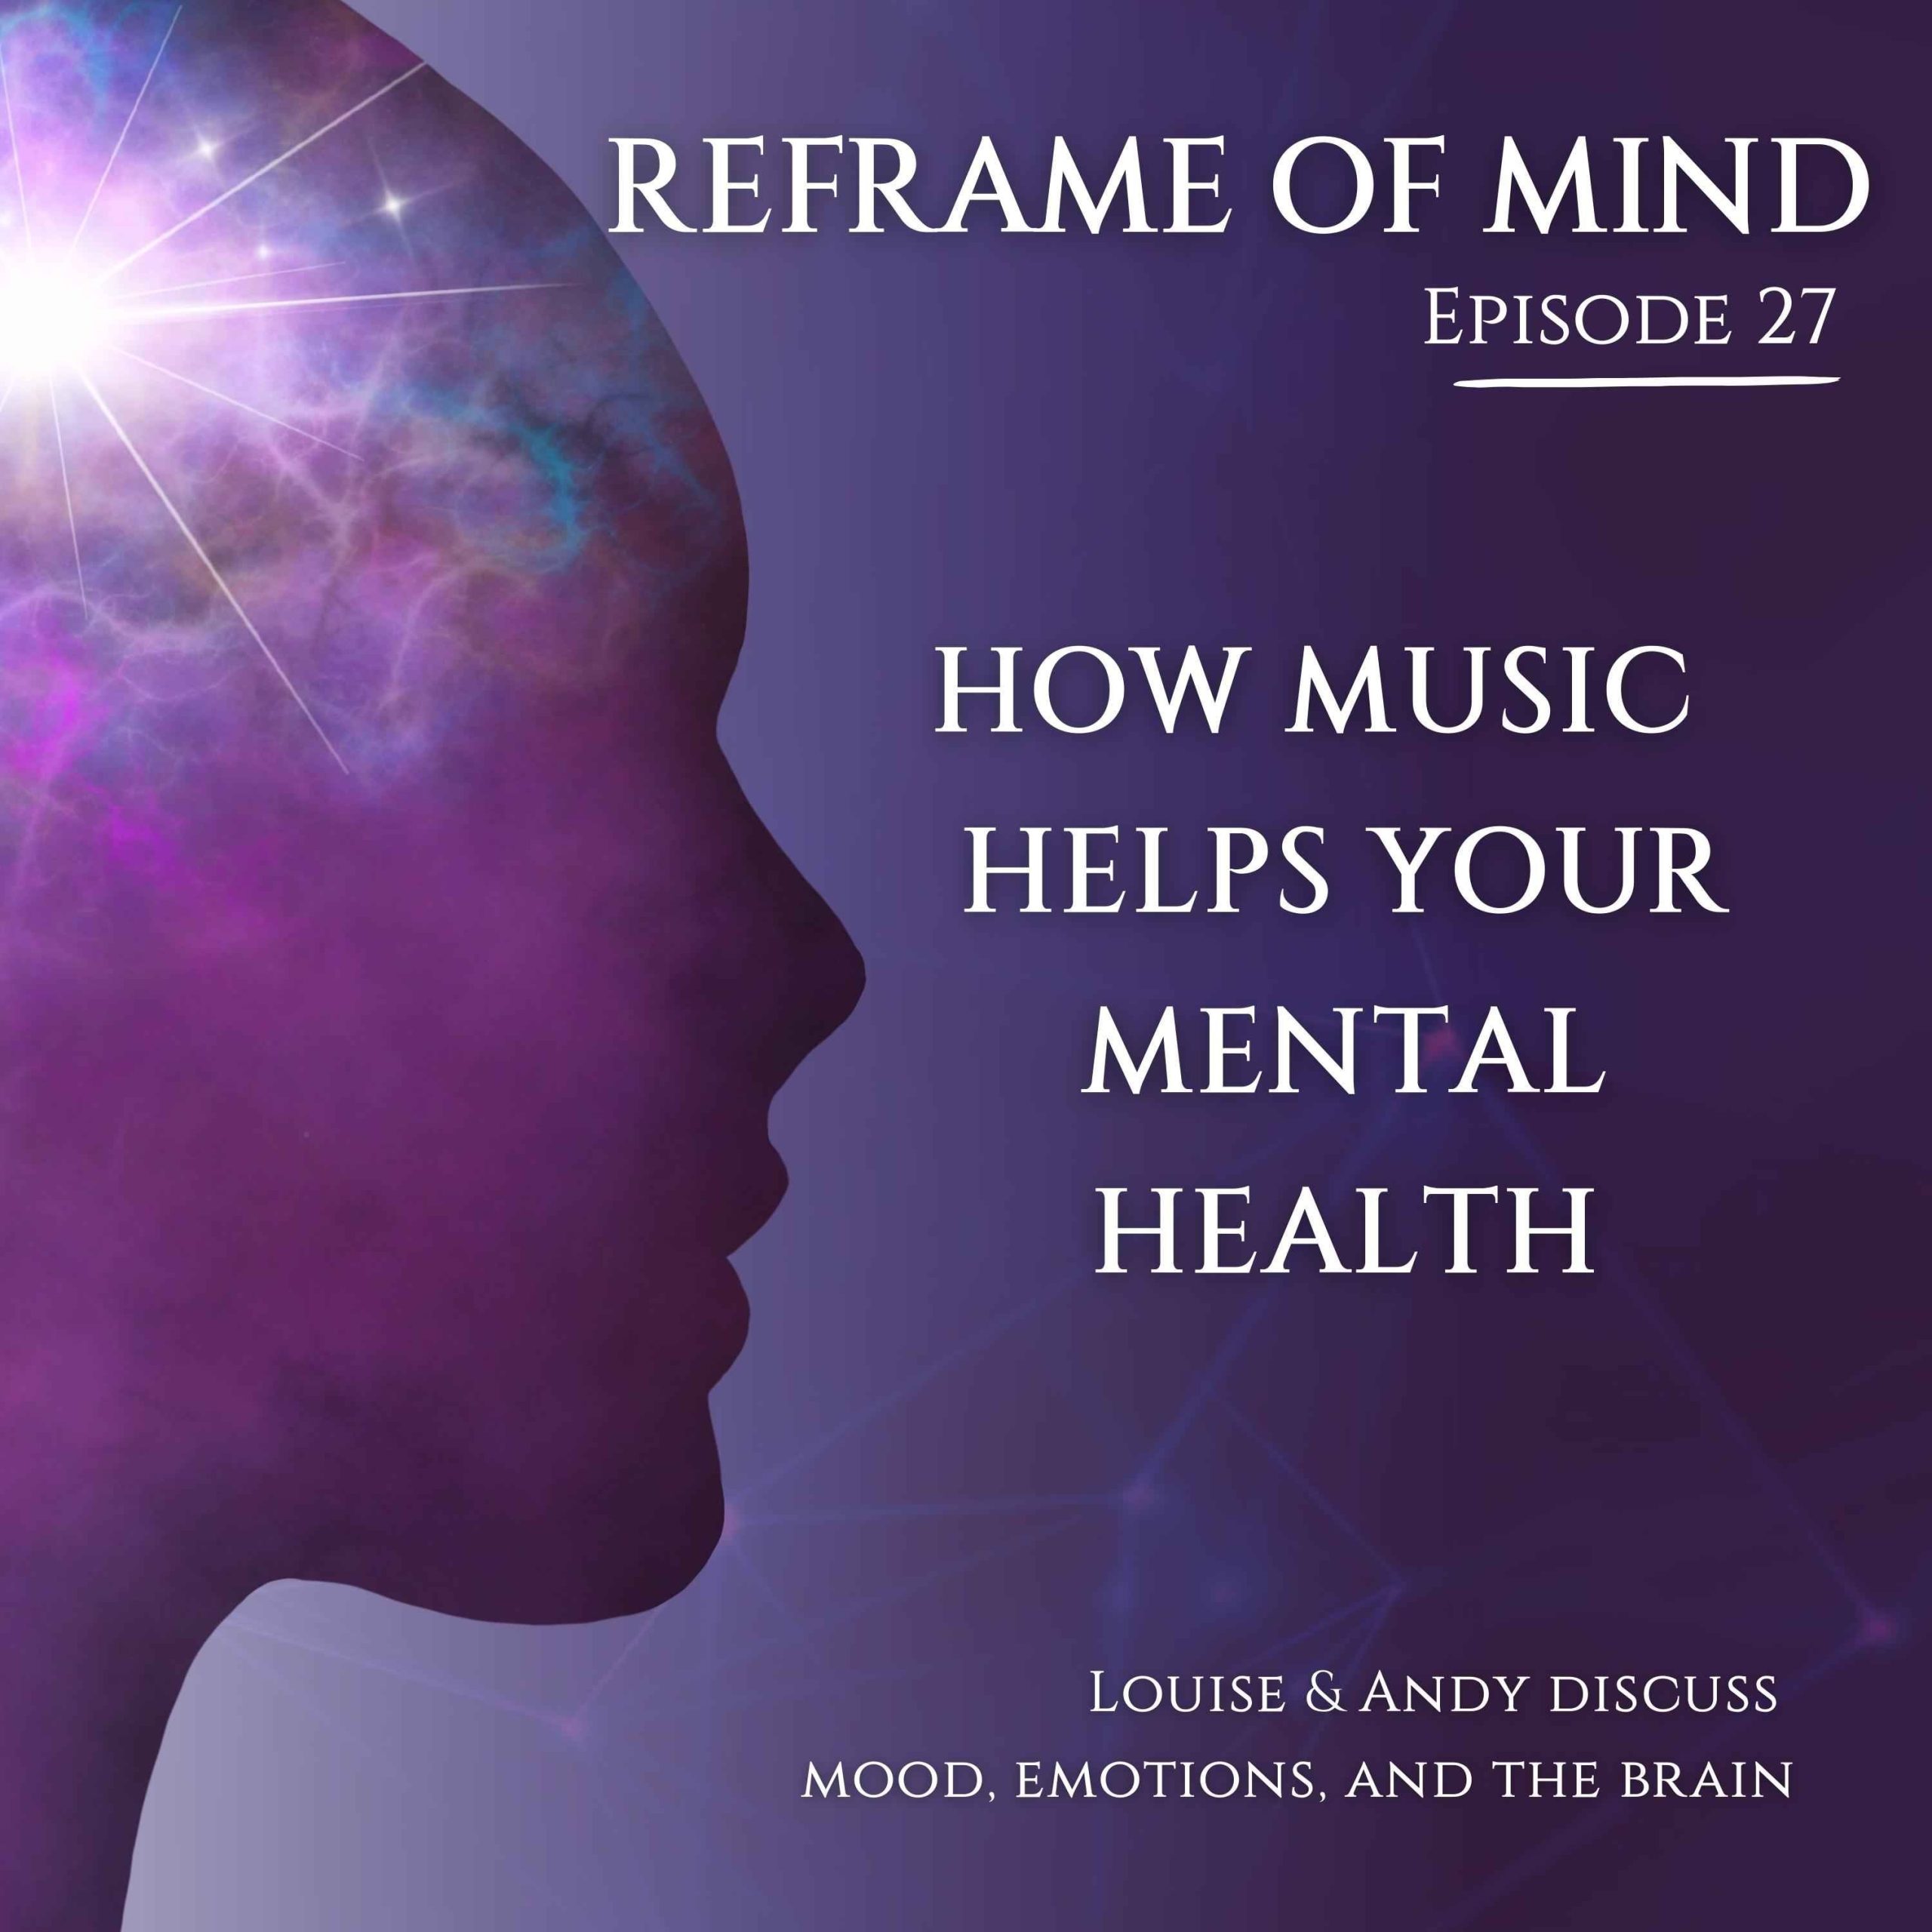 How music helps your mental health